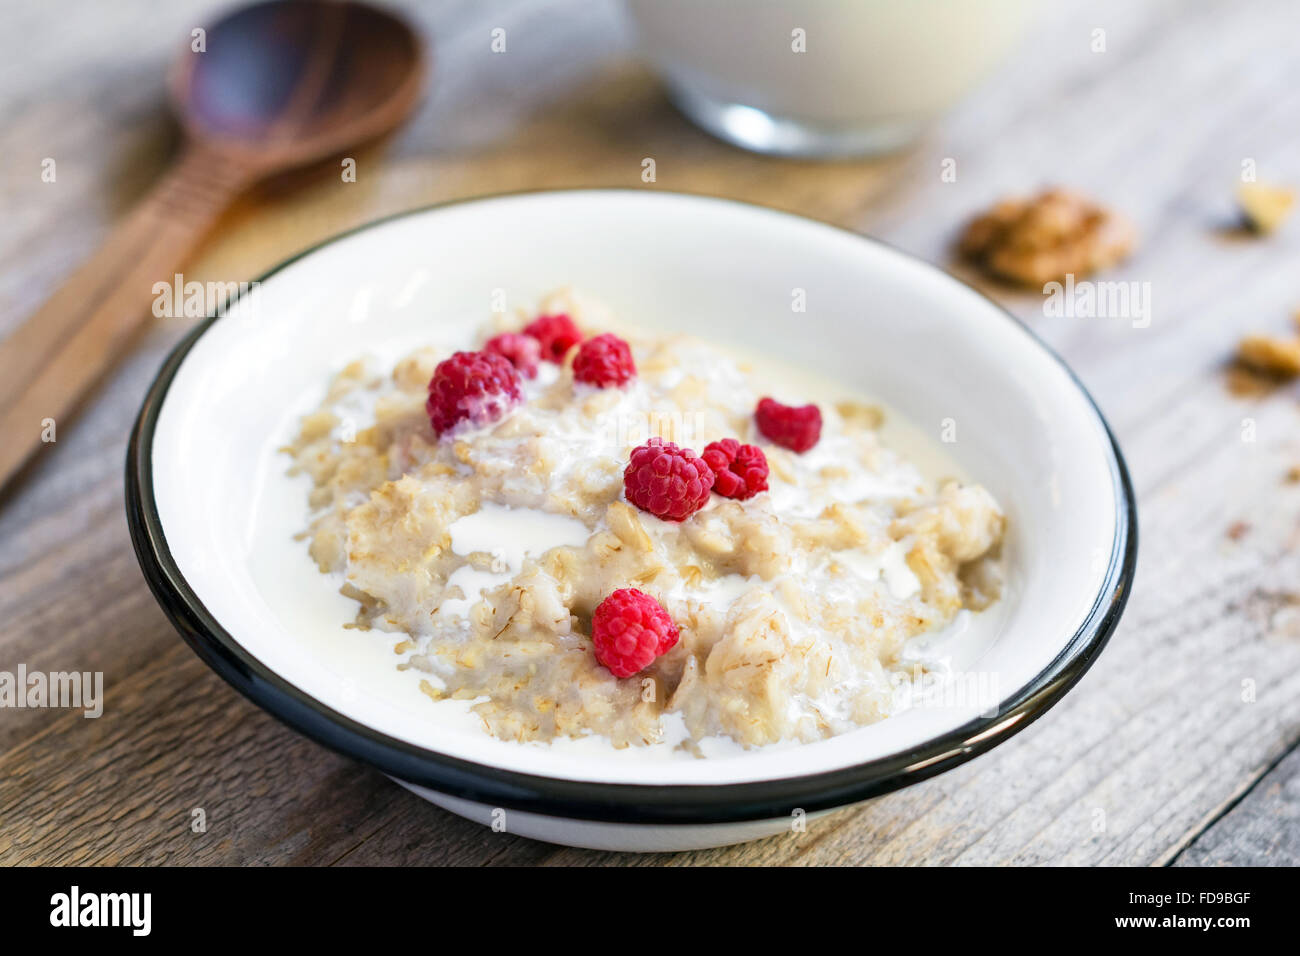 Oatmeal porridge with raspberries and milk on textured wooden table, country style healthy breakfast, Selective focus Stock Photo